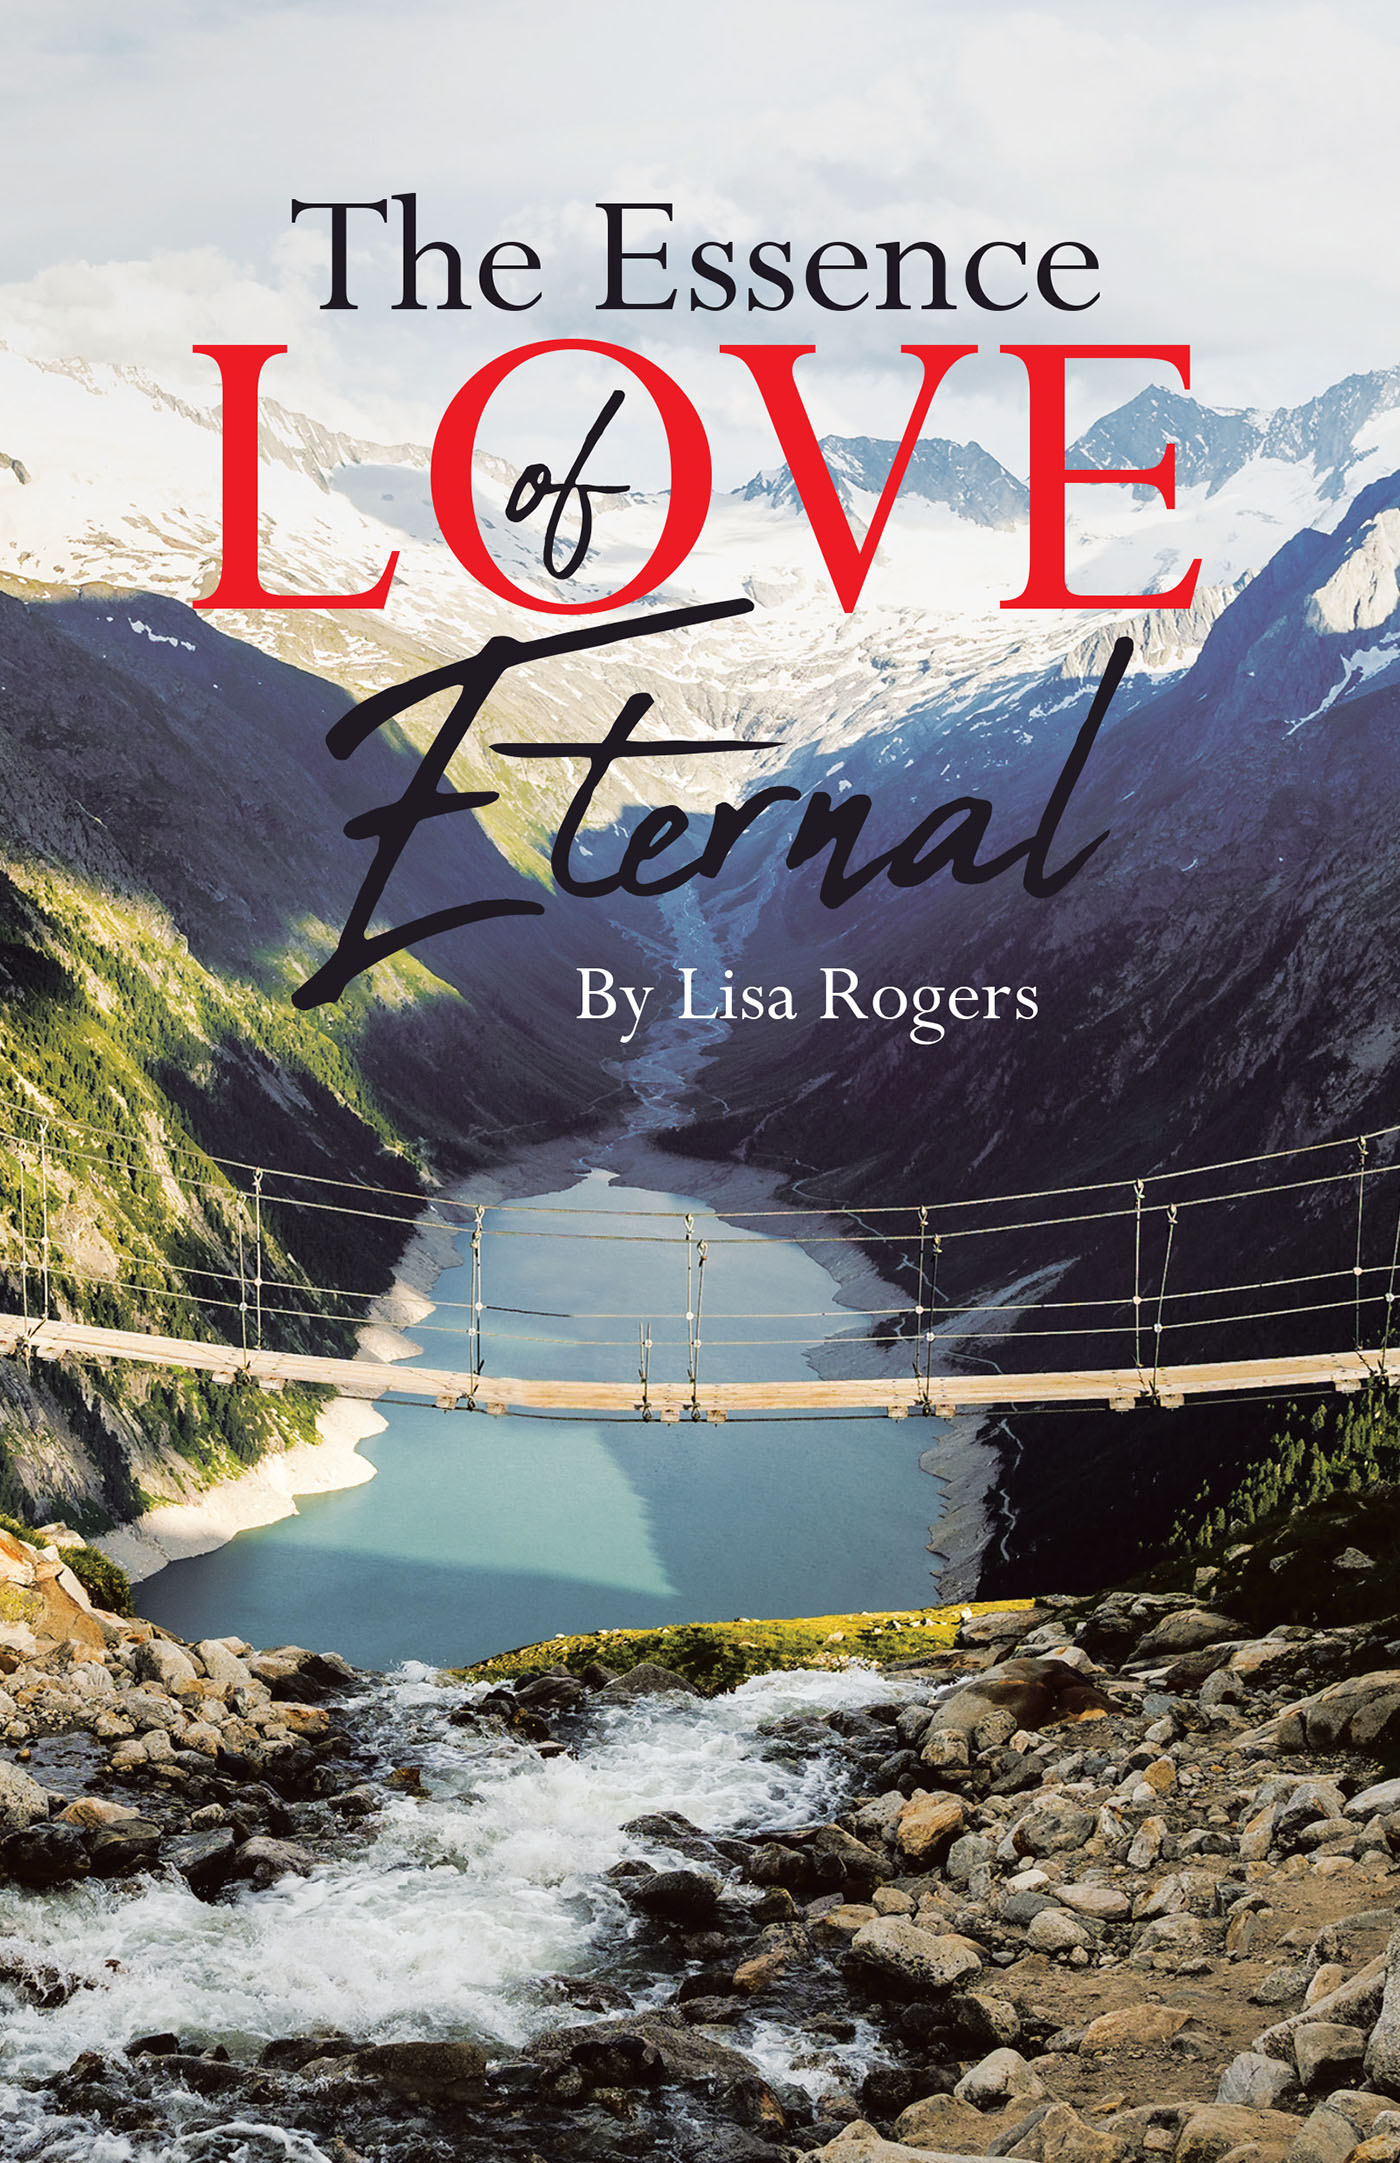 Author Lisa Rogers’s New Book, "The Essence of Love Eternal," is a Powerful Series of Poetry That Takes Readers on a Thought-Provoking Journey Through the Author's Soul